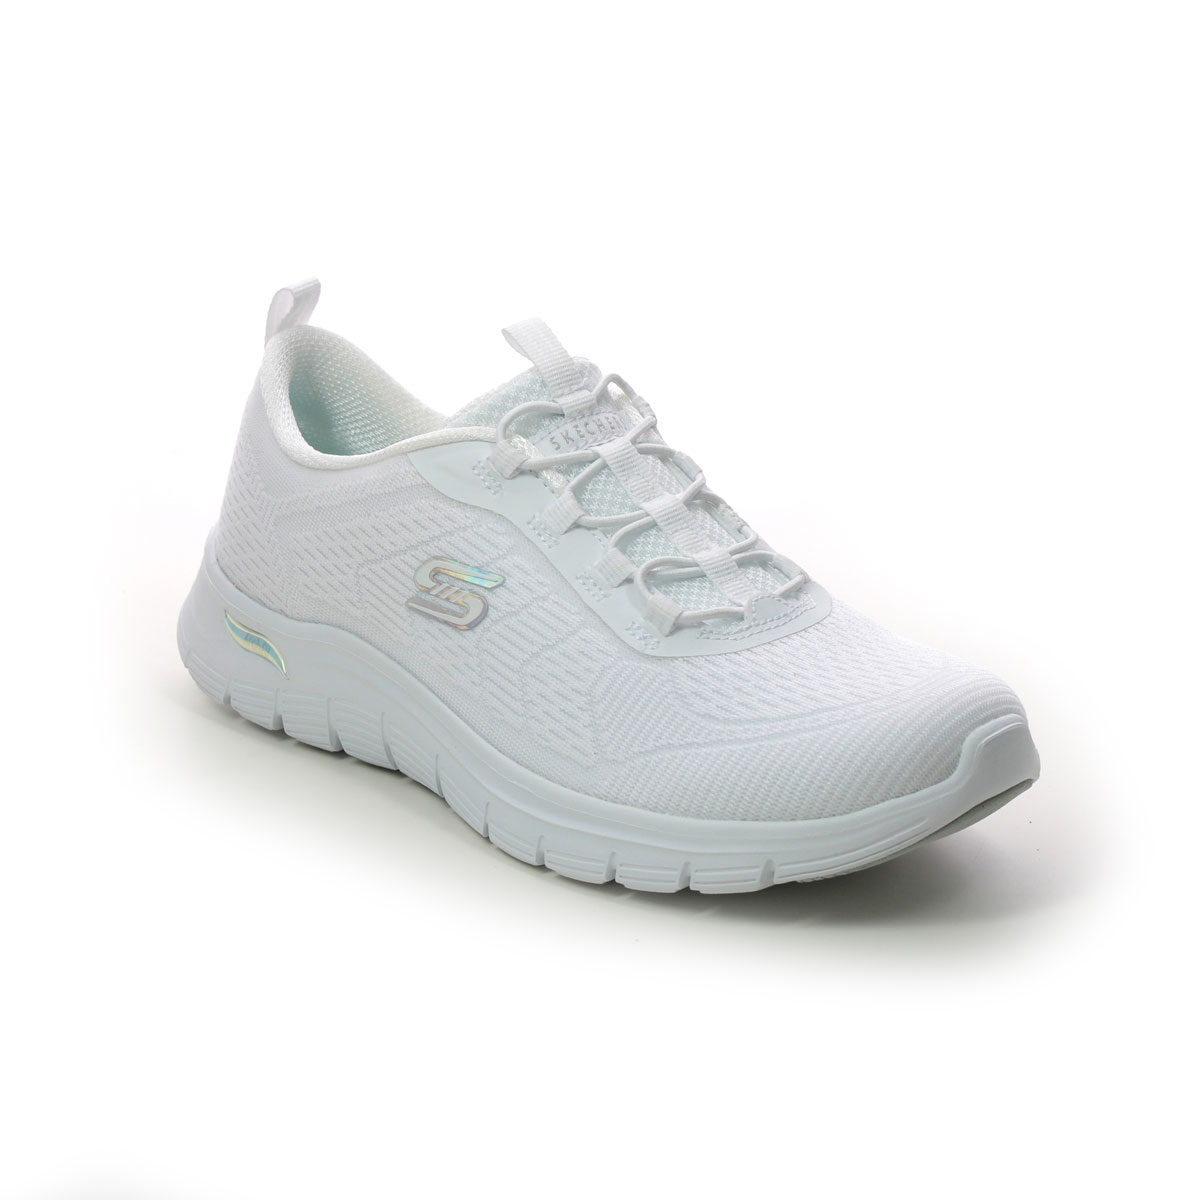 Skechers Arch Fit Vista WHT White Womens trainers 104377 in a Plain Textile in Size 3